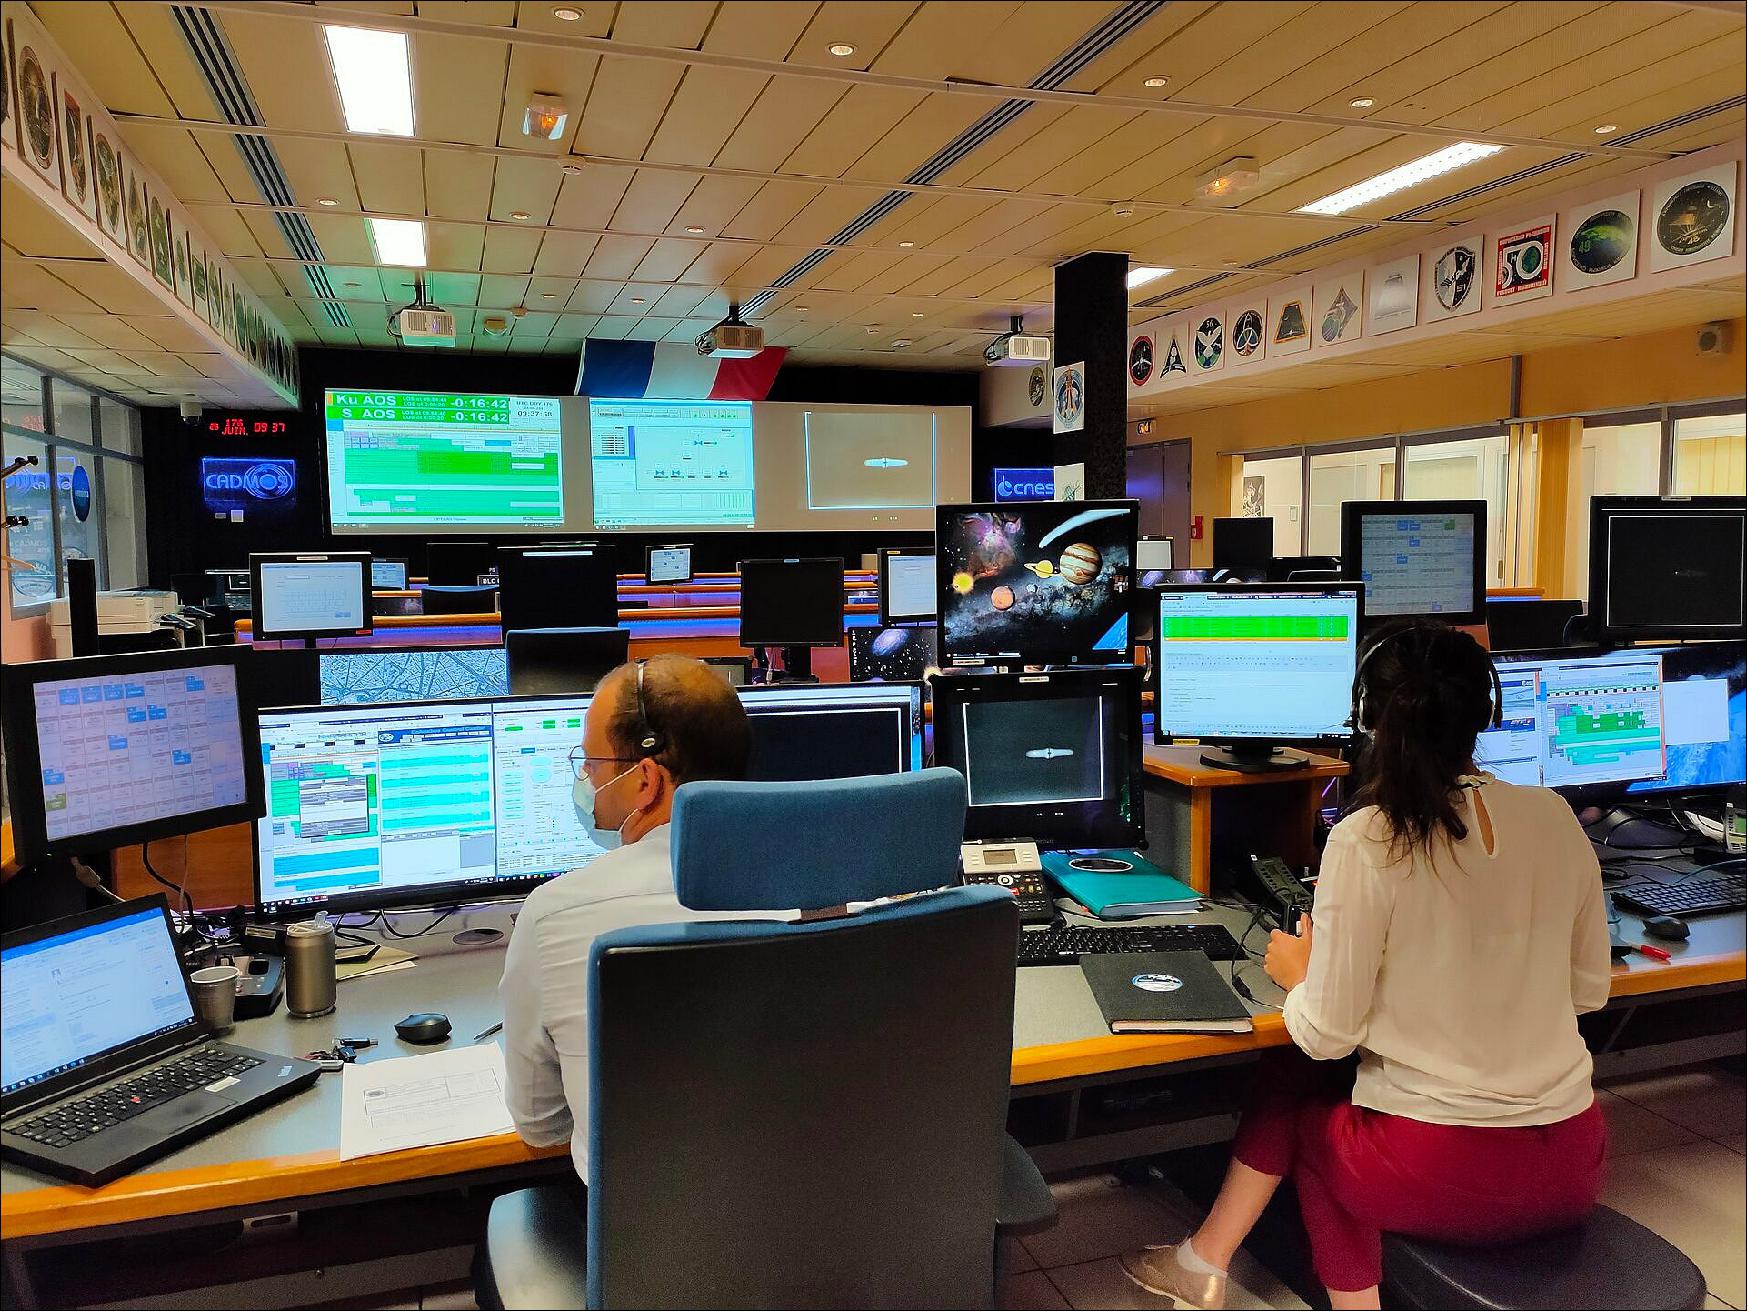 Figure 7: The CADMOS control centre during the 12th campaign of the PK-4 experiment. CADMOS Human Spaceflight Department of France's space agency (CNES) and one of Europe's User Support Operations Centers that control and monitor experiments and hardware on the ISS (image credit: CNES)